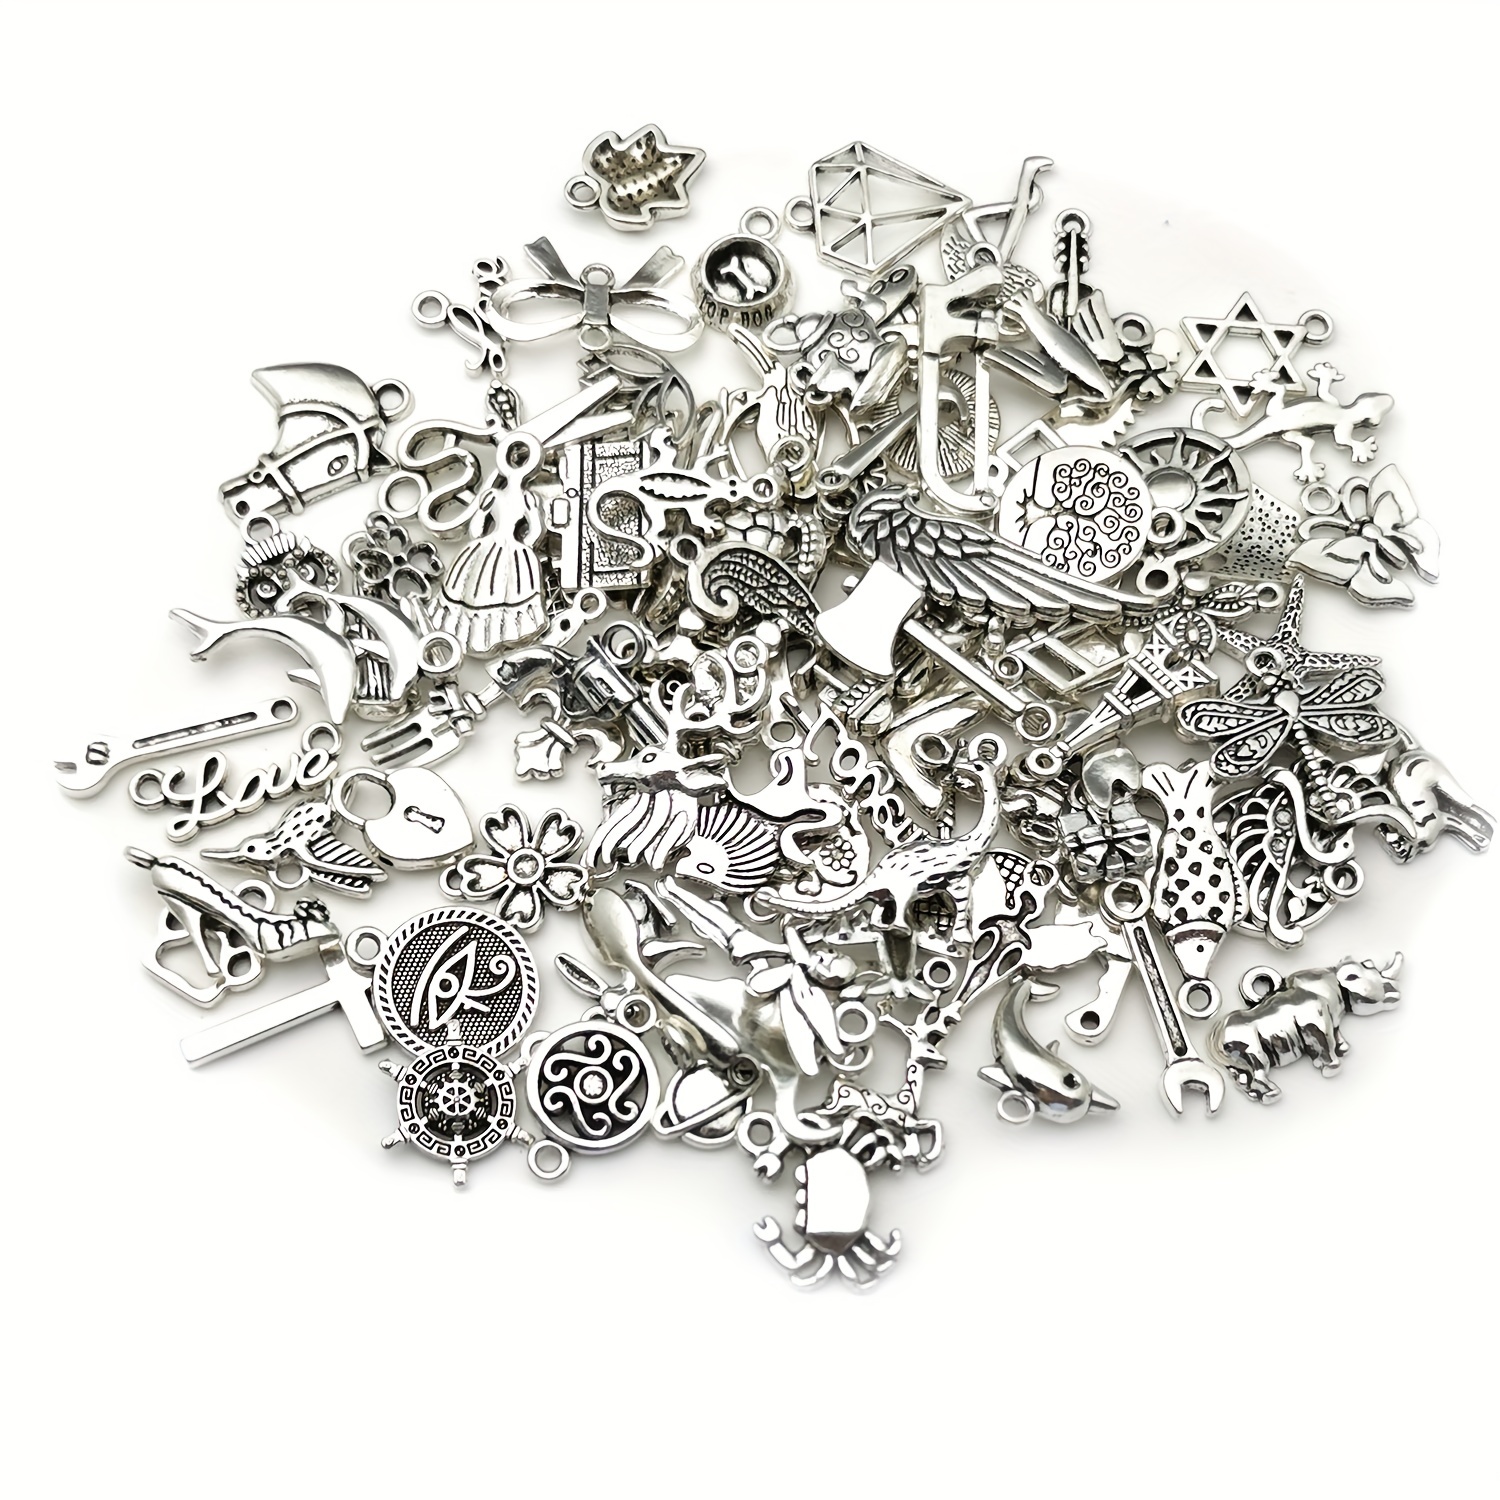 40pcs Charms Witch Riding Broomstick 16x12mm Tibetan Bronze Silver Color  Pendants Antique Jewelry Making DIY Handmade Craft For